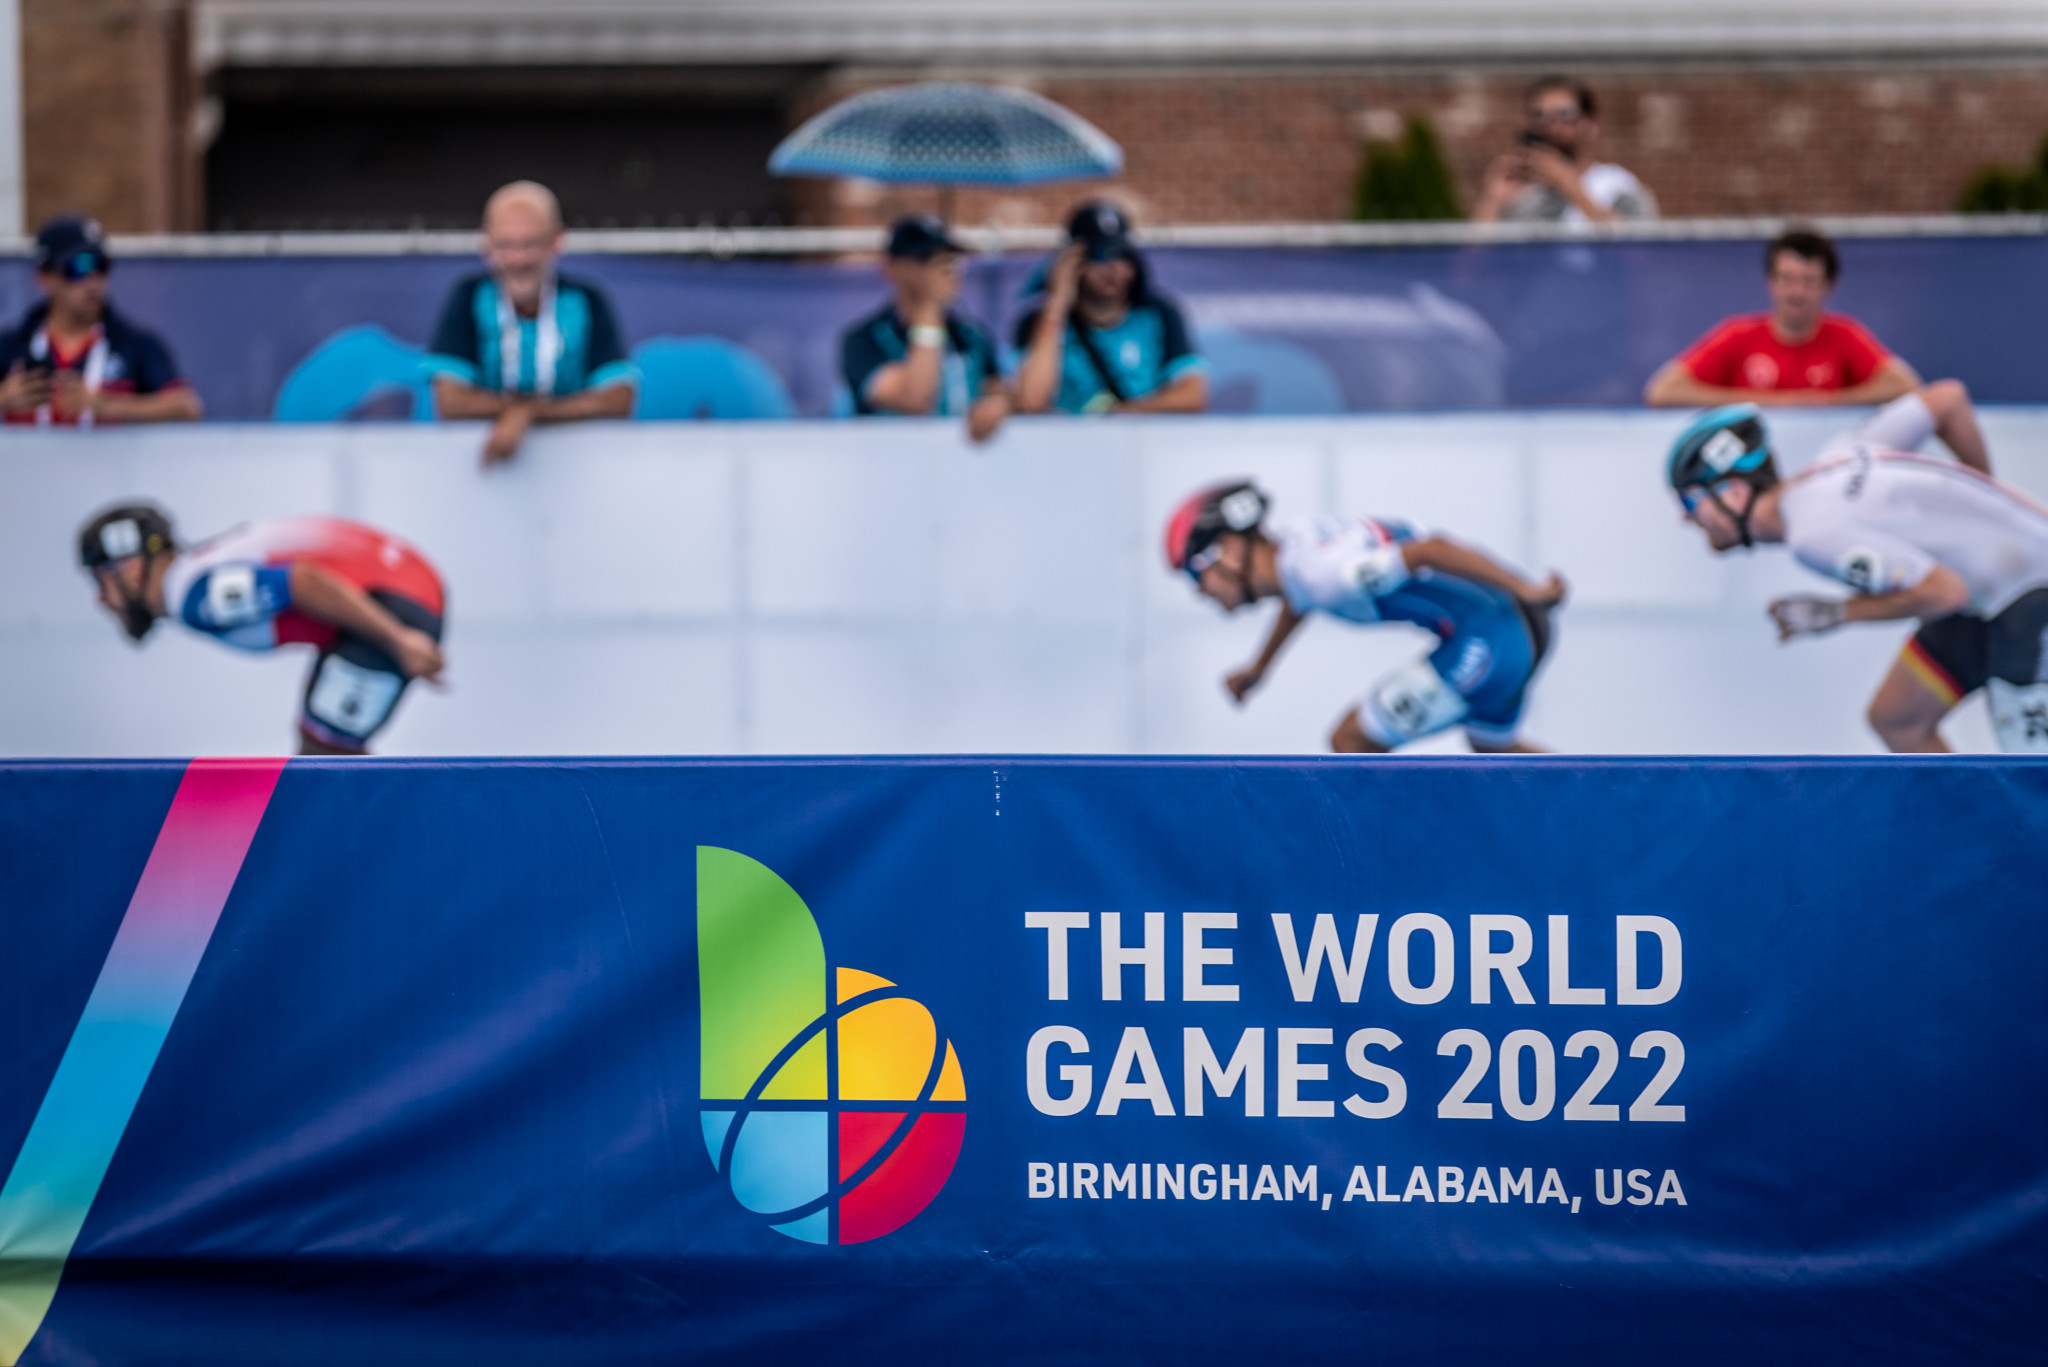 Final debts from 2022 World Games in Birmingham set to be paid off in October